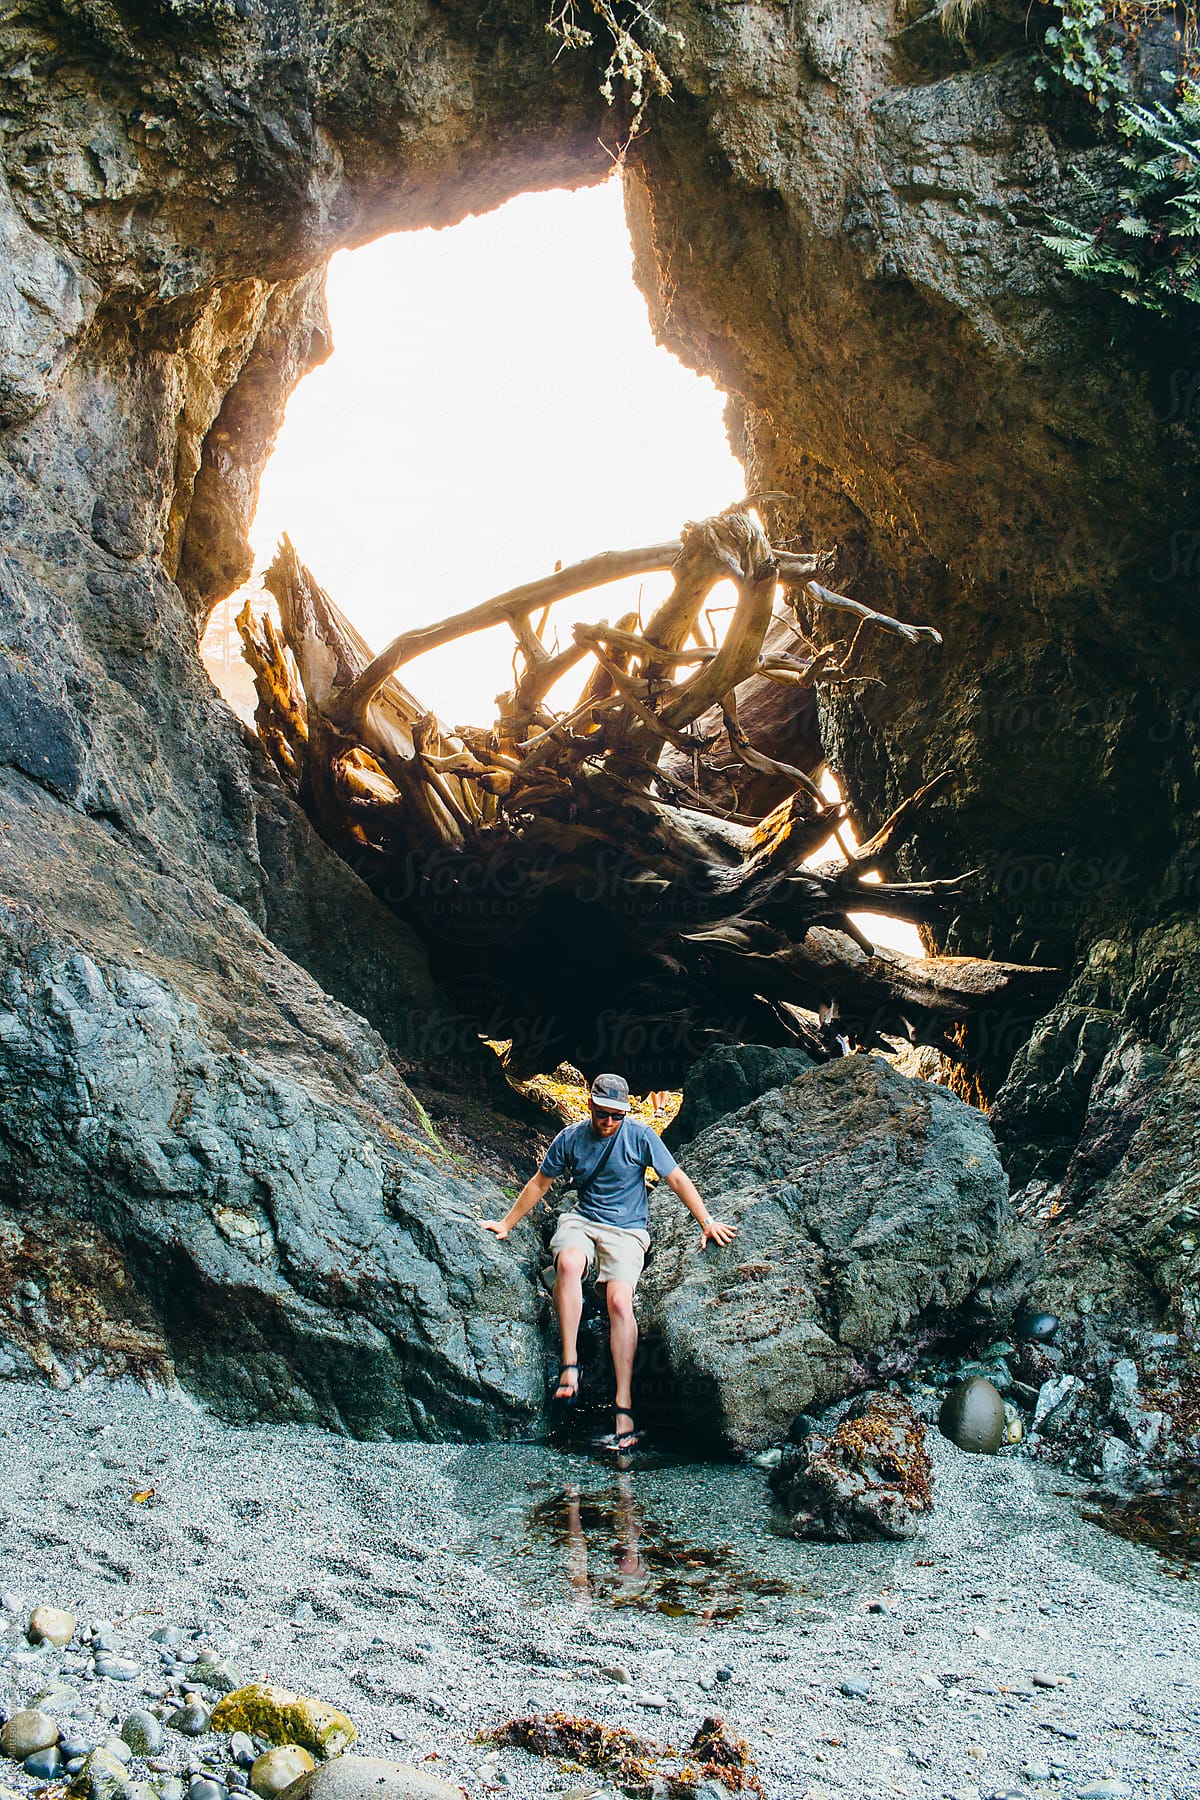 Young Man Wearing Shorts And Sandals Climbing Through Rocky Arch On Ocean shore